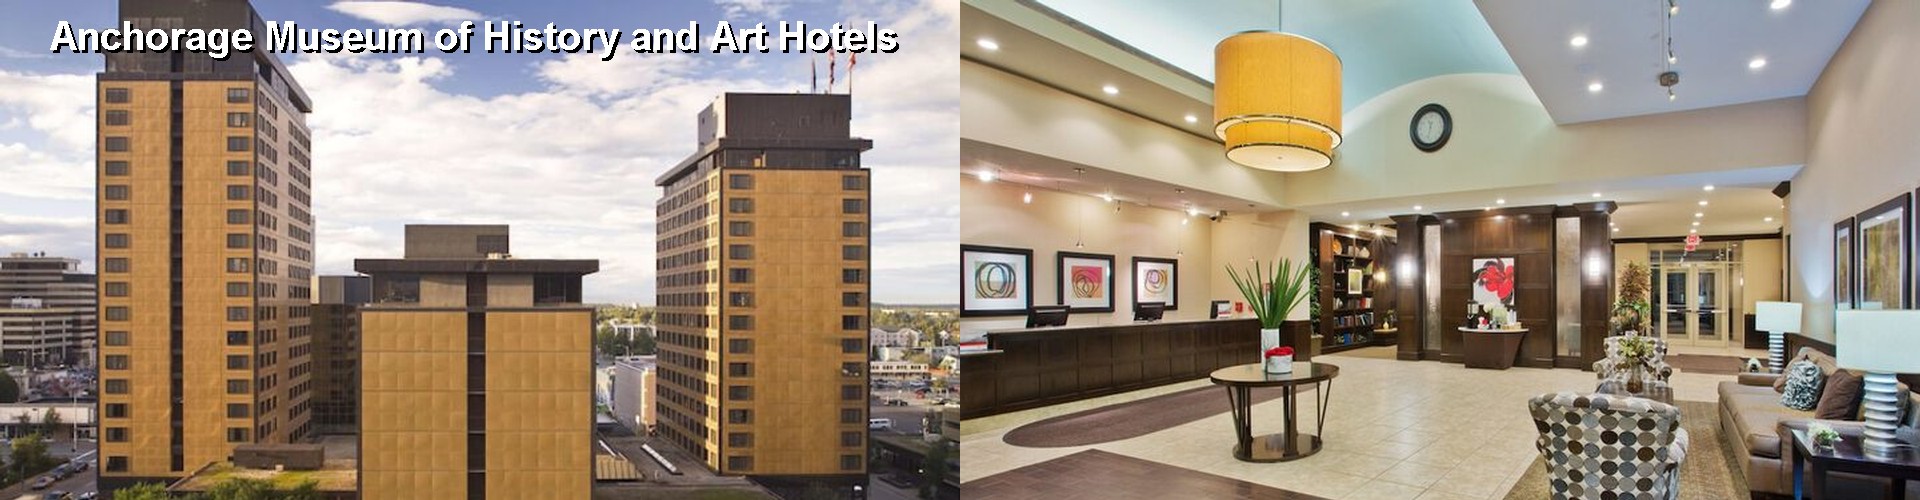 4 Best Hotels near Anchorage Museum of History and Art